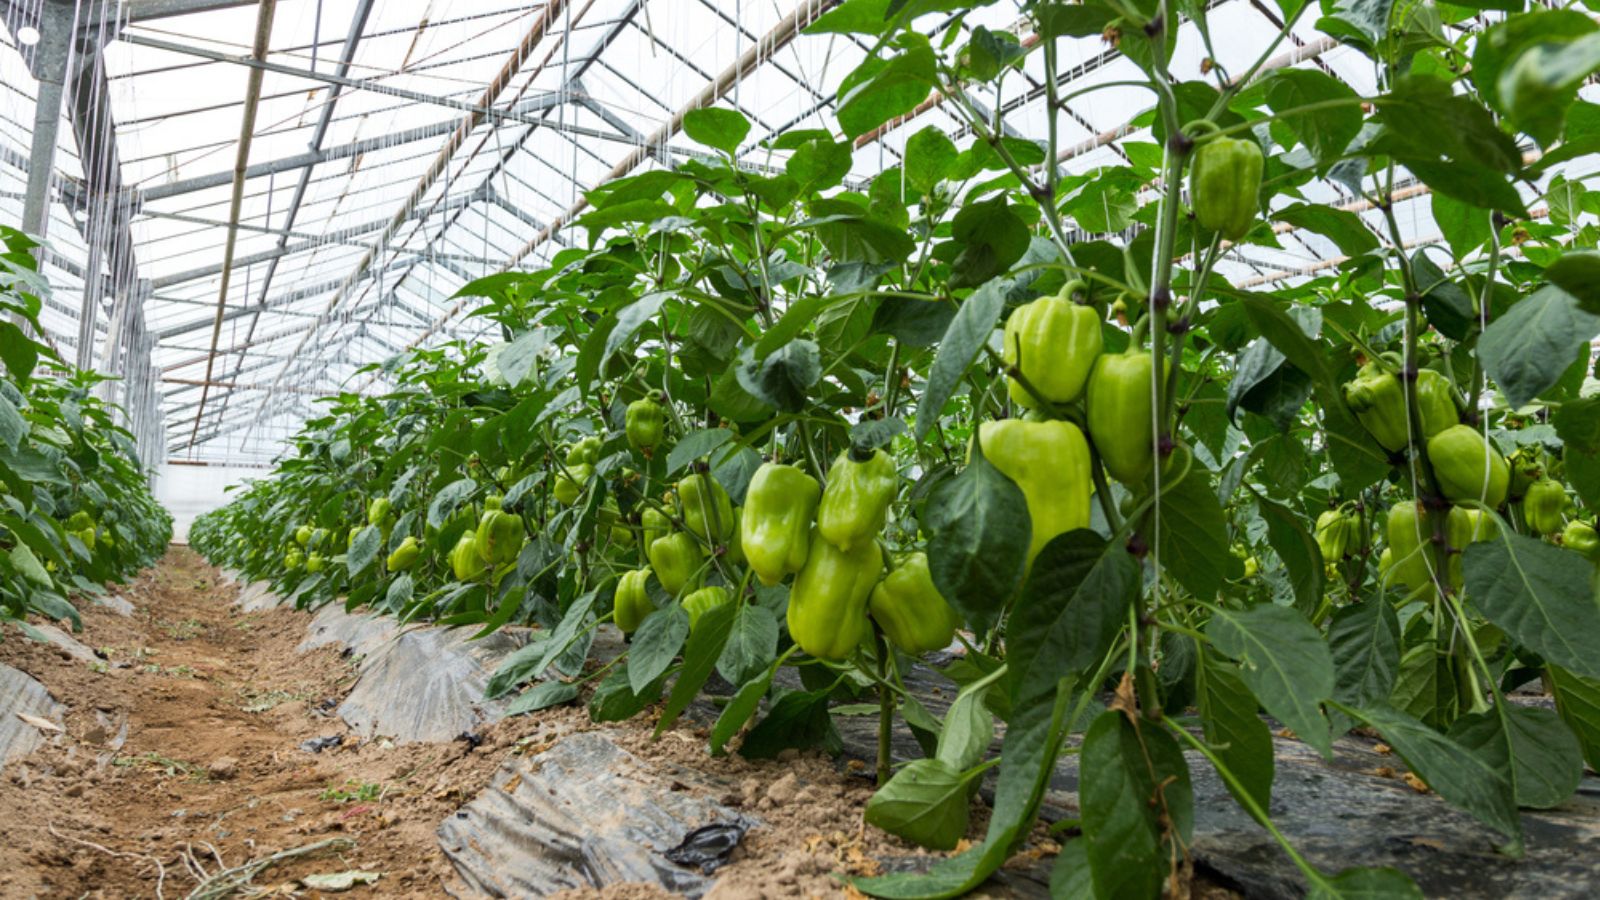 Nano zinc oxide sprayed through the leaves improves the yield of capsicum